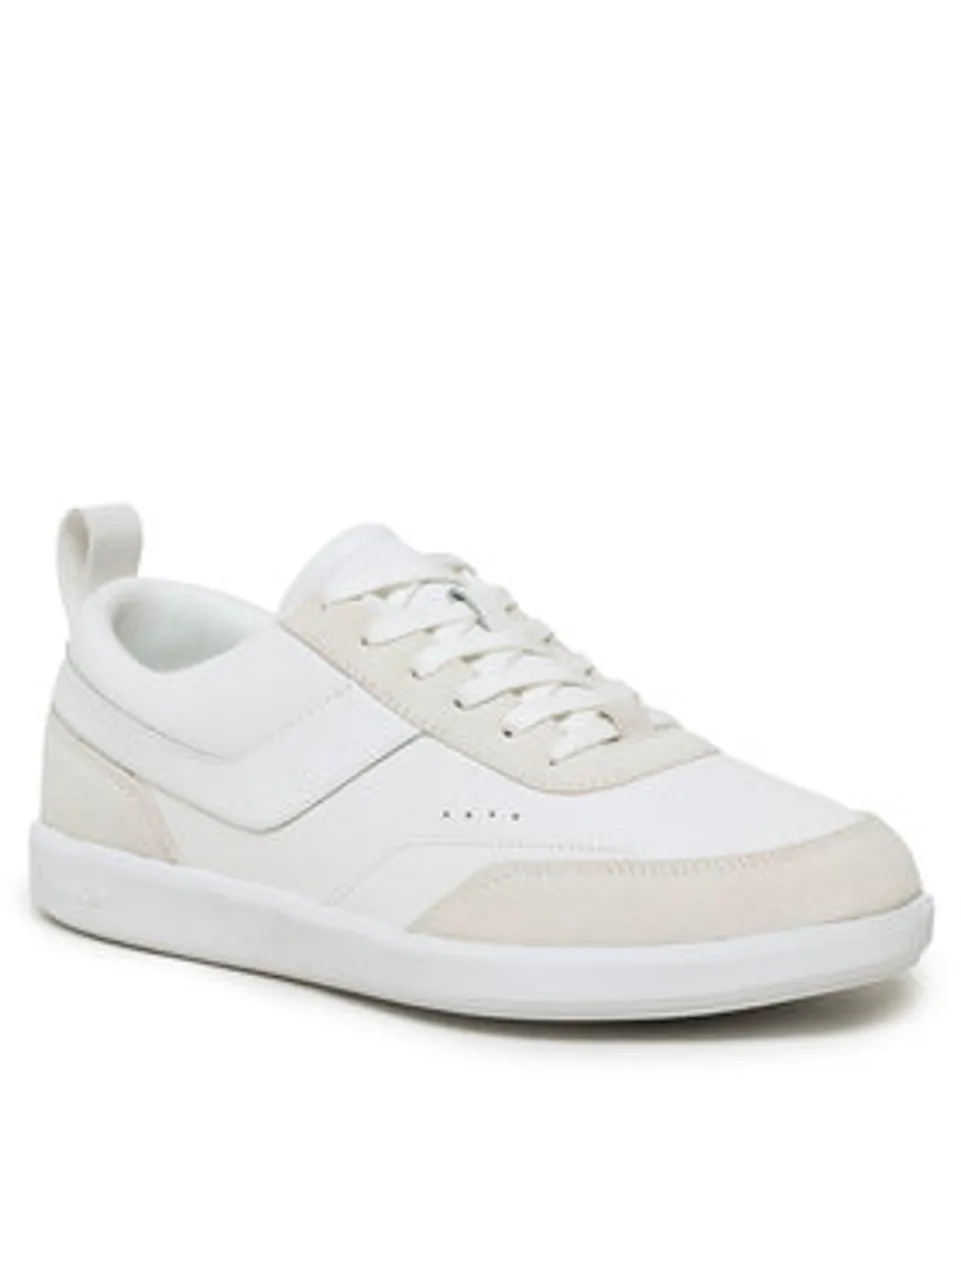 Calvin Klein Sneakers Low Top Lace Up Lth Mix HM0HM00851 Weiß